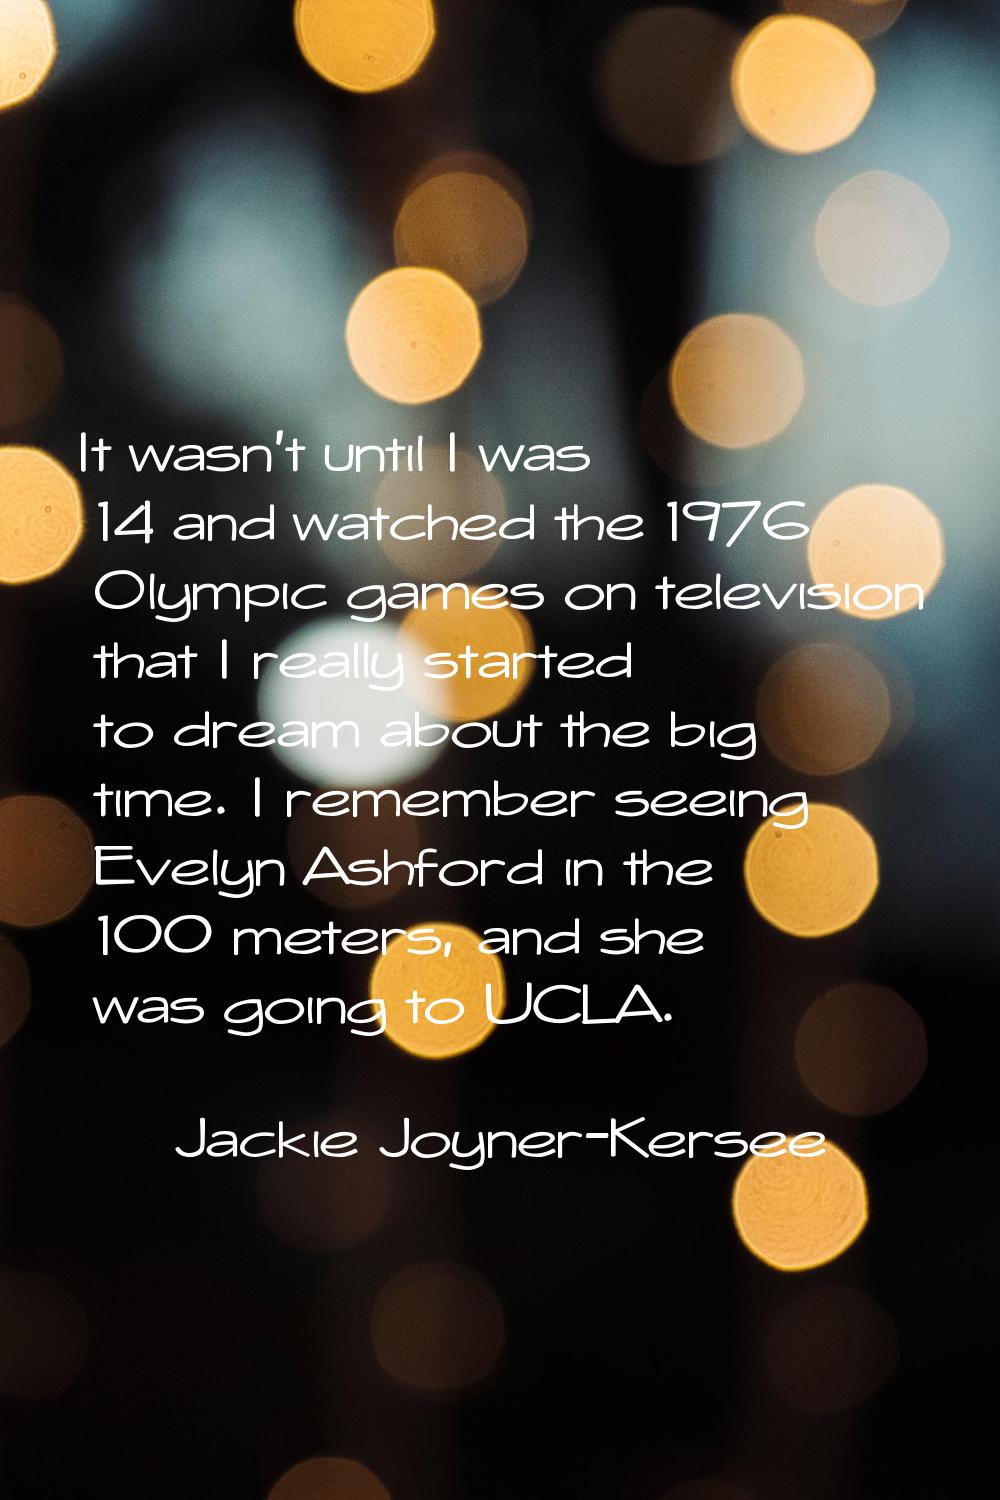 It wasn't until I was 14 and watched the 1976 Olympic games on television that I really started to 